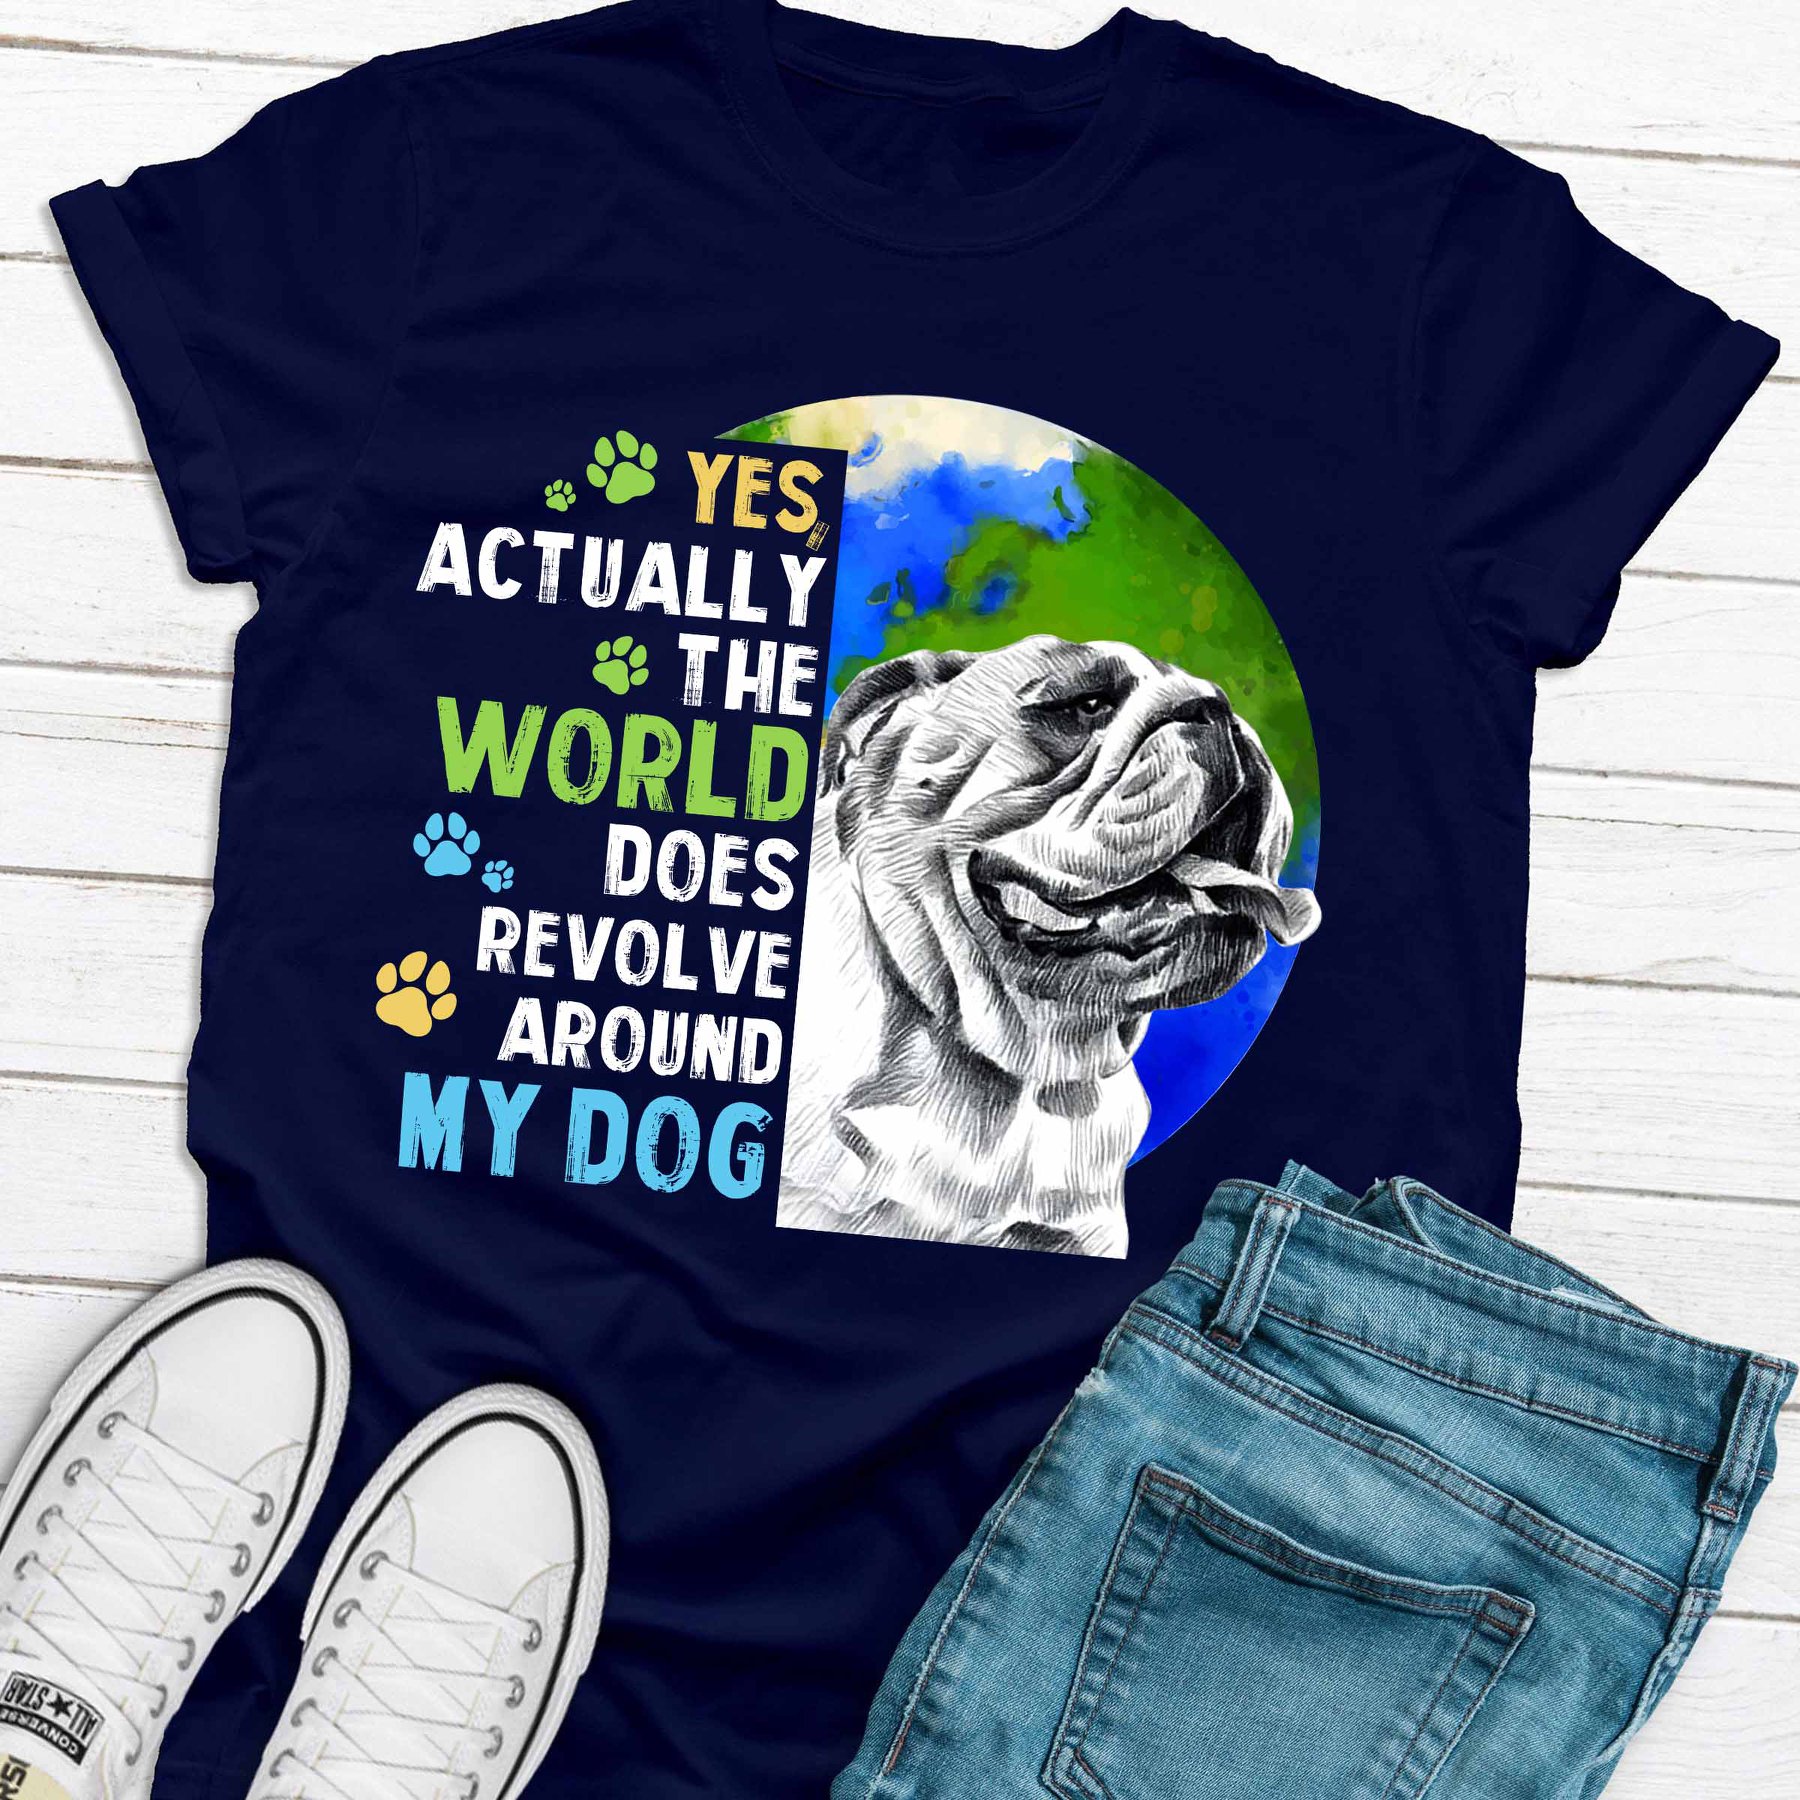 Yes actually the world does revolve around my dog - Pug dog